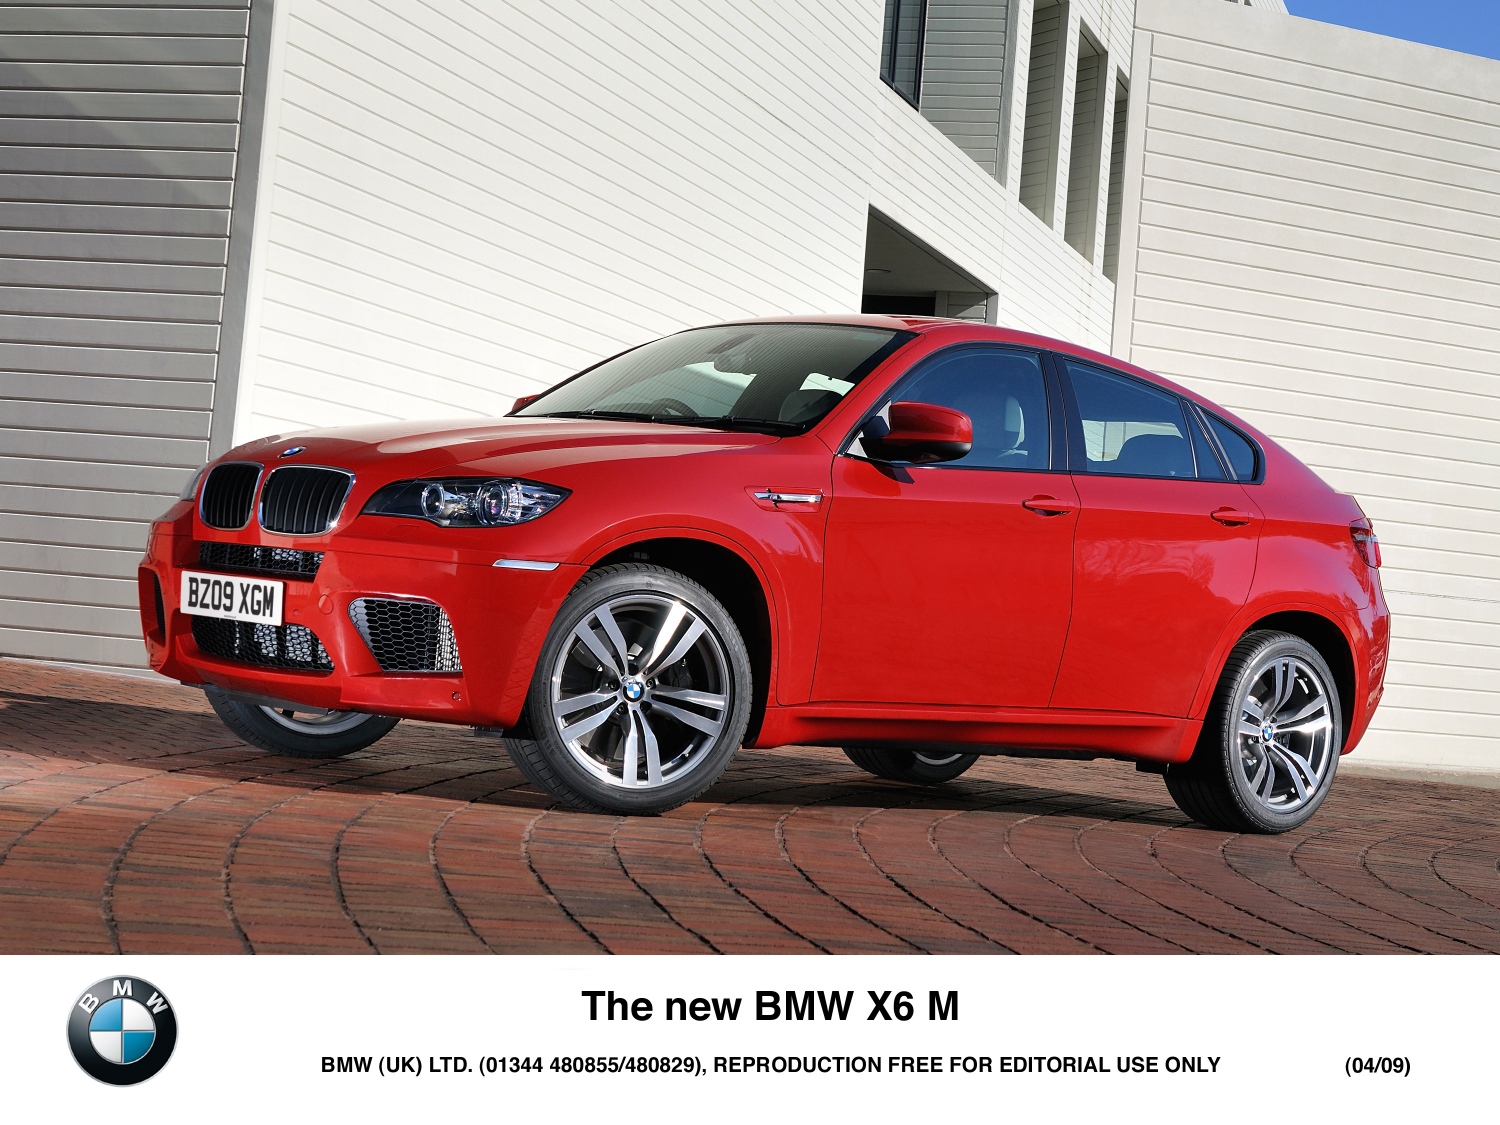 Head over to BMW blog where Horatiu has been covering the X5M and X6M with